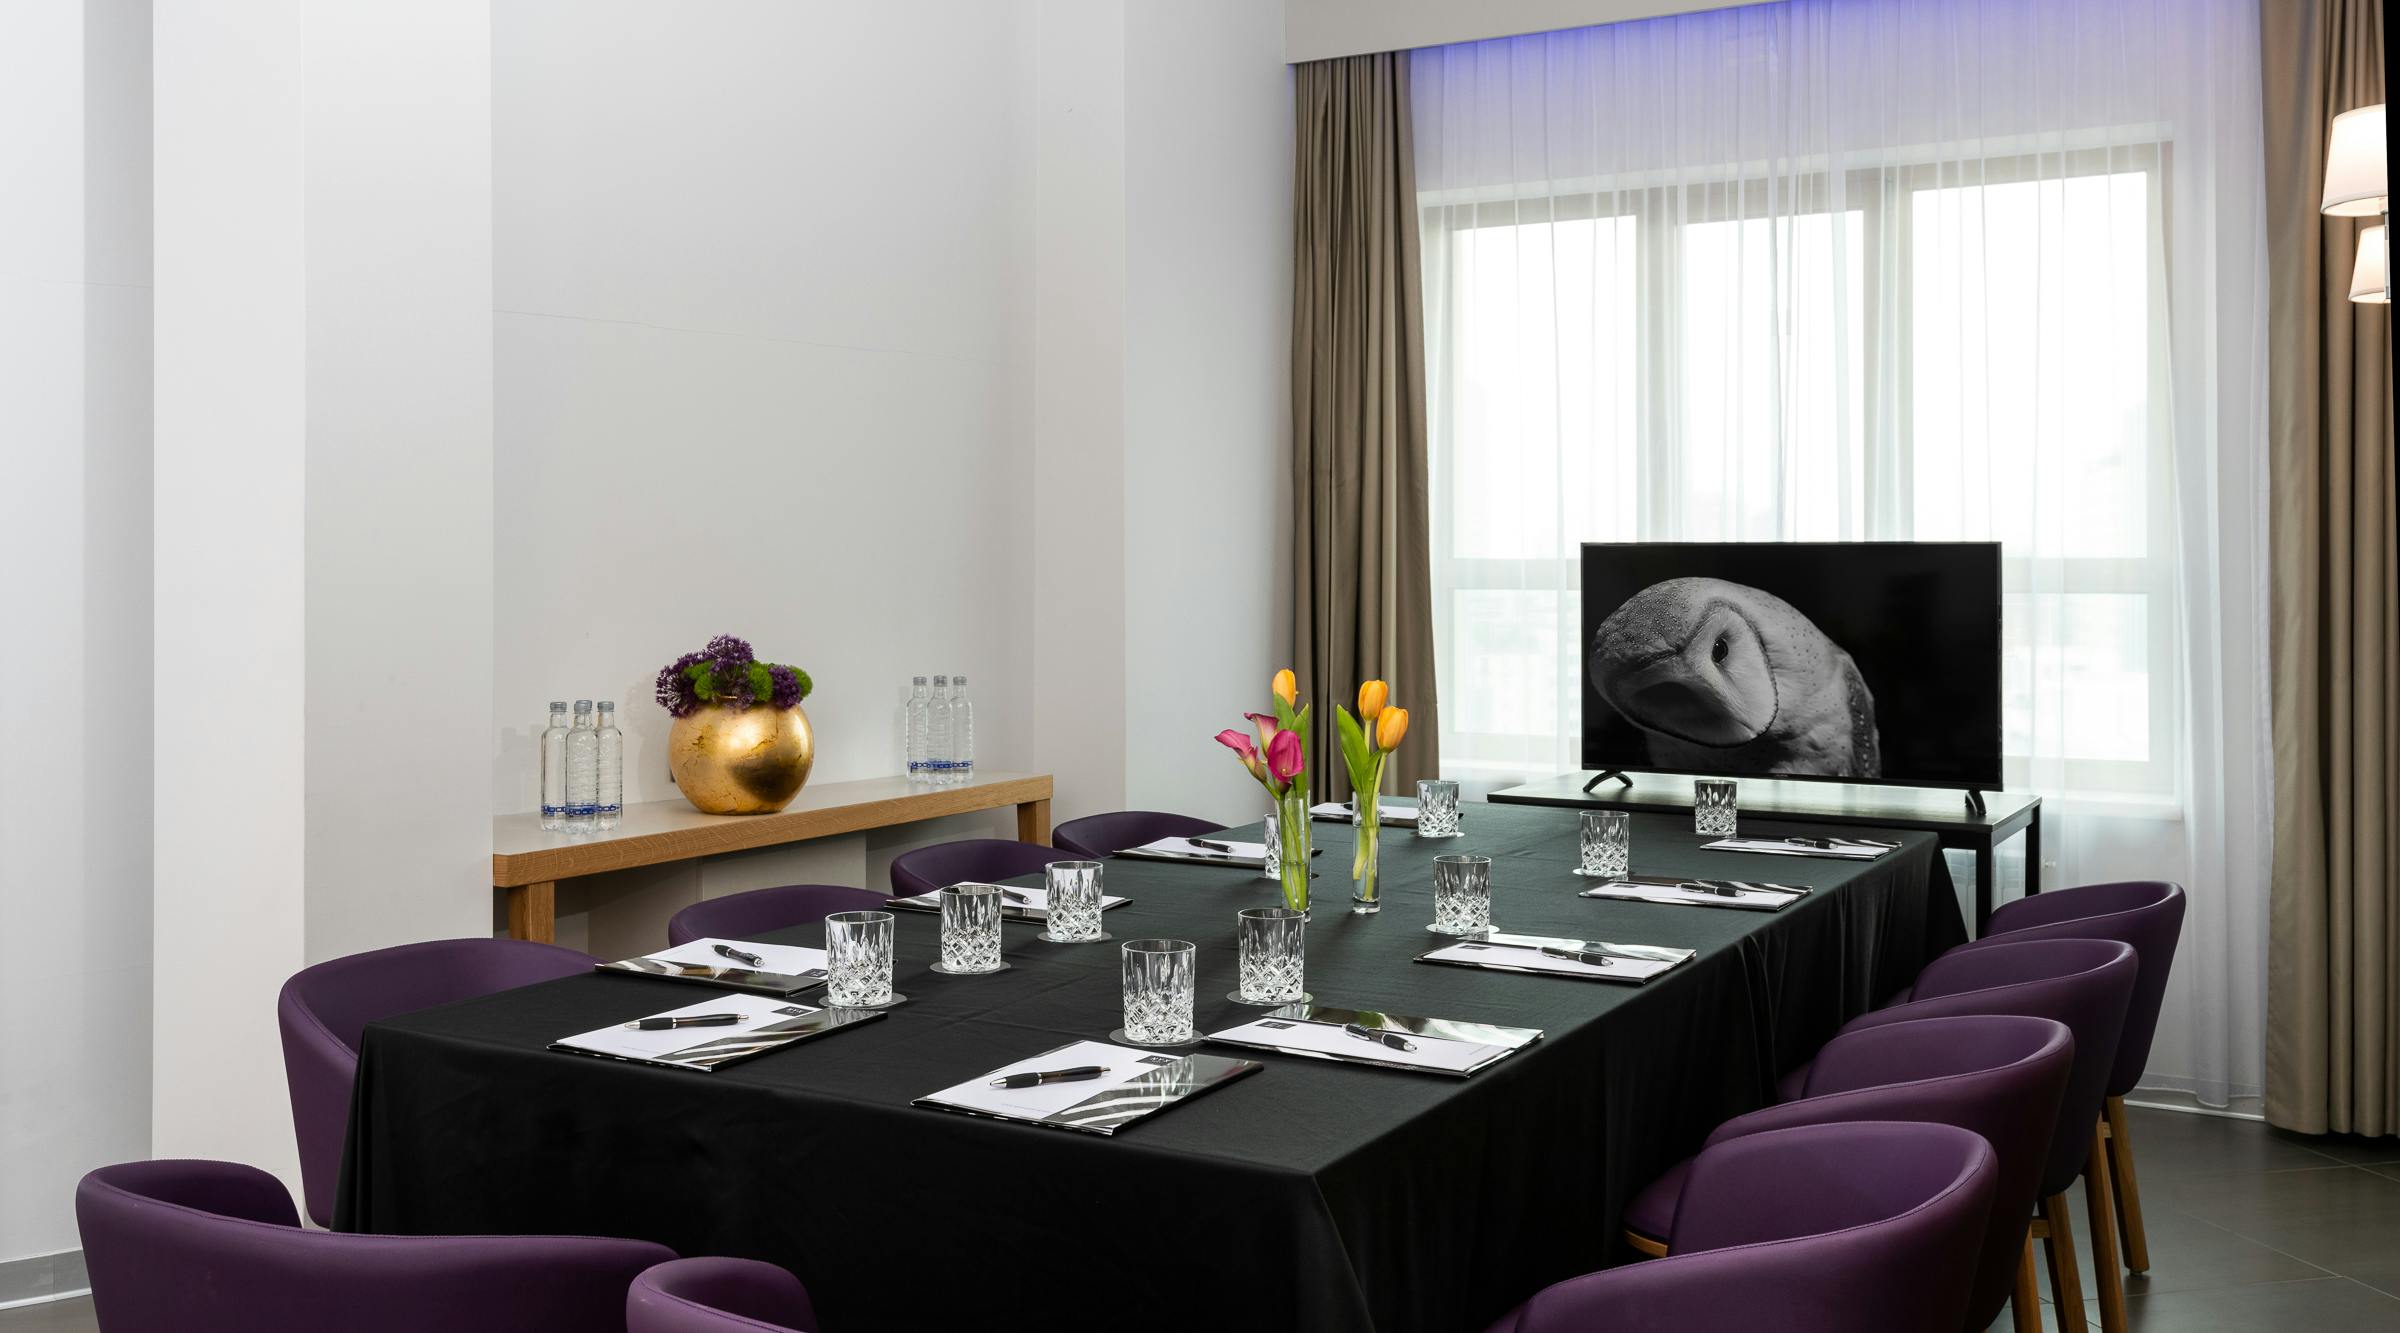 Meeting room with purple chairs and black table